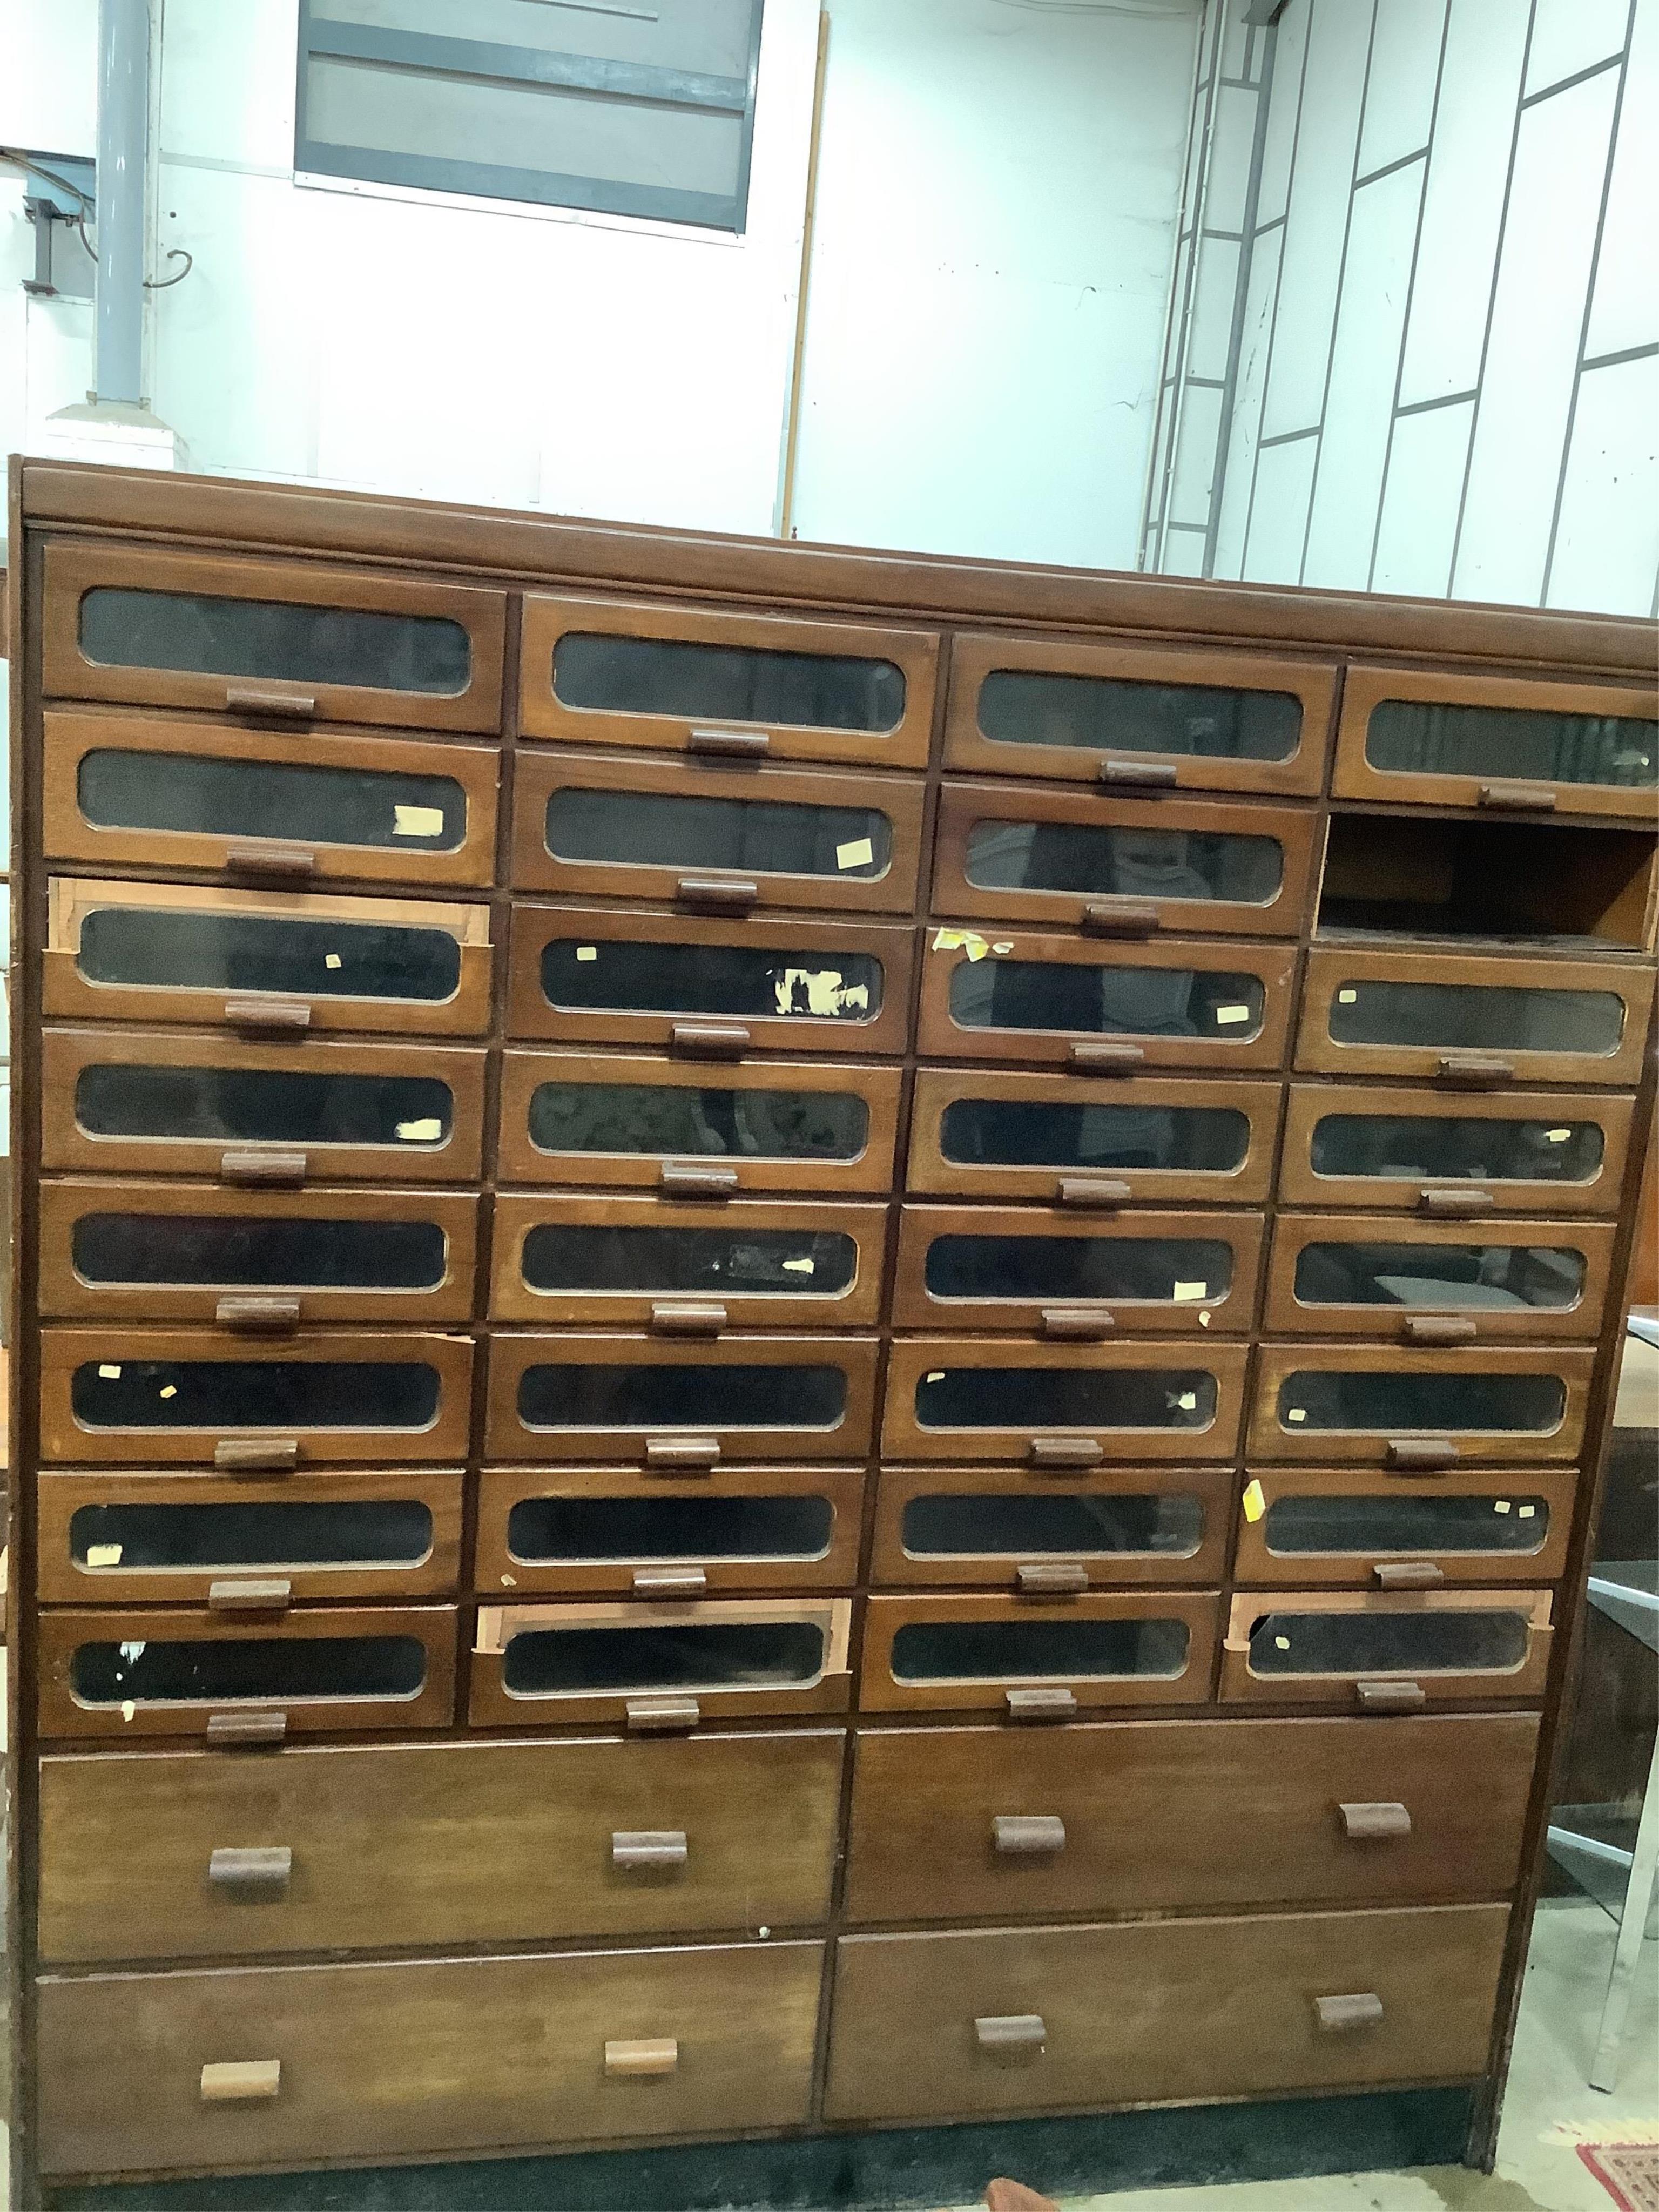 A large mid century mahogany haberdasher's cabinet, width 183cm, depth 50cm, height 199cm. Condition - poor